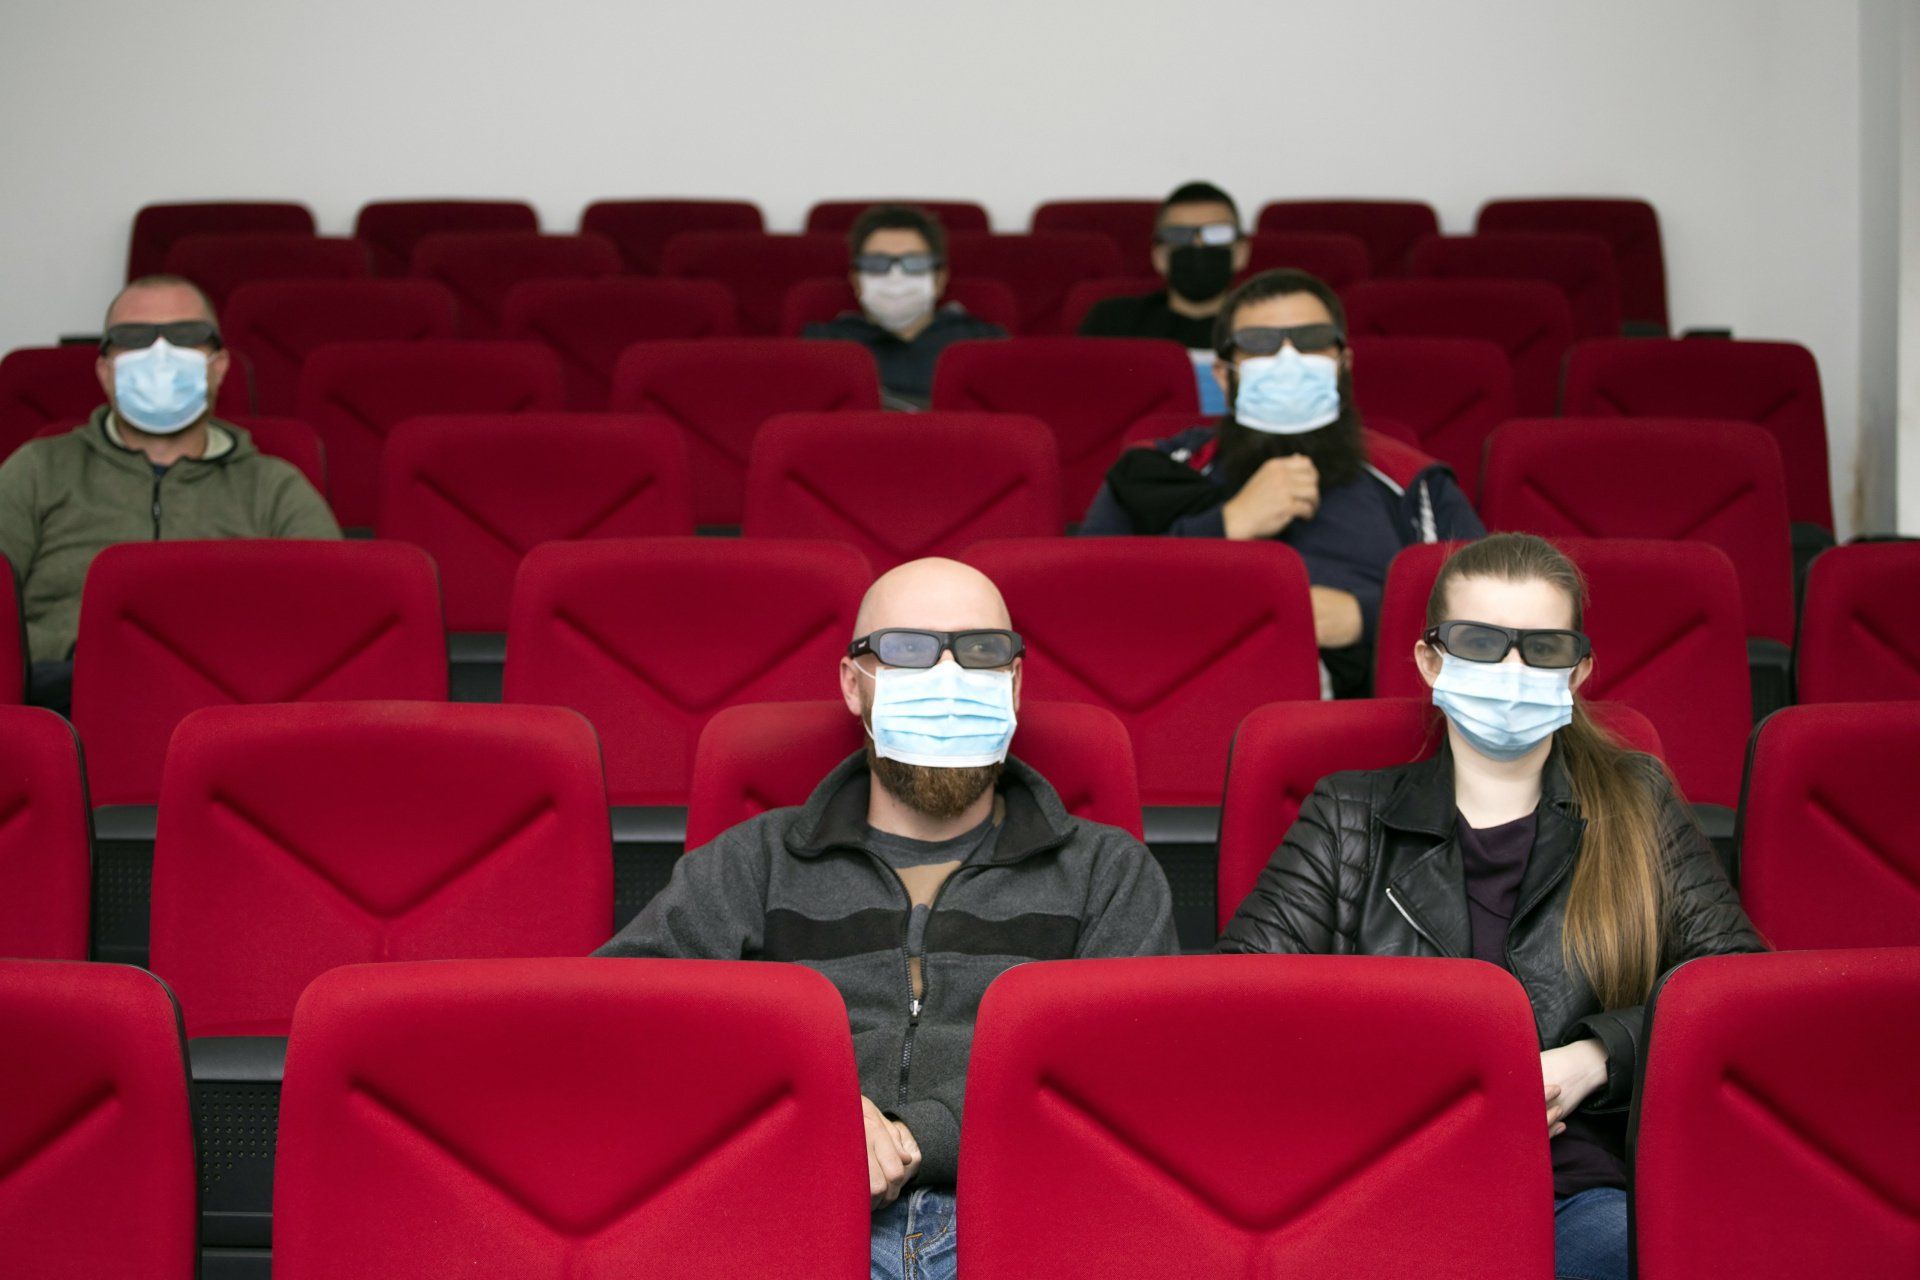 A photograph of a group of people, socially distanced and wearing masks, in a cinema auditorium